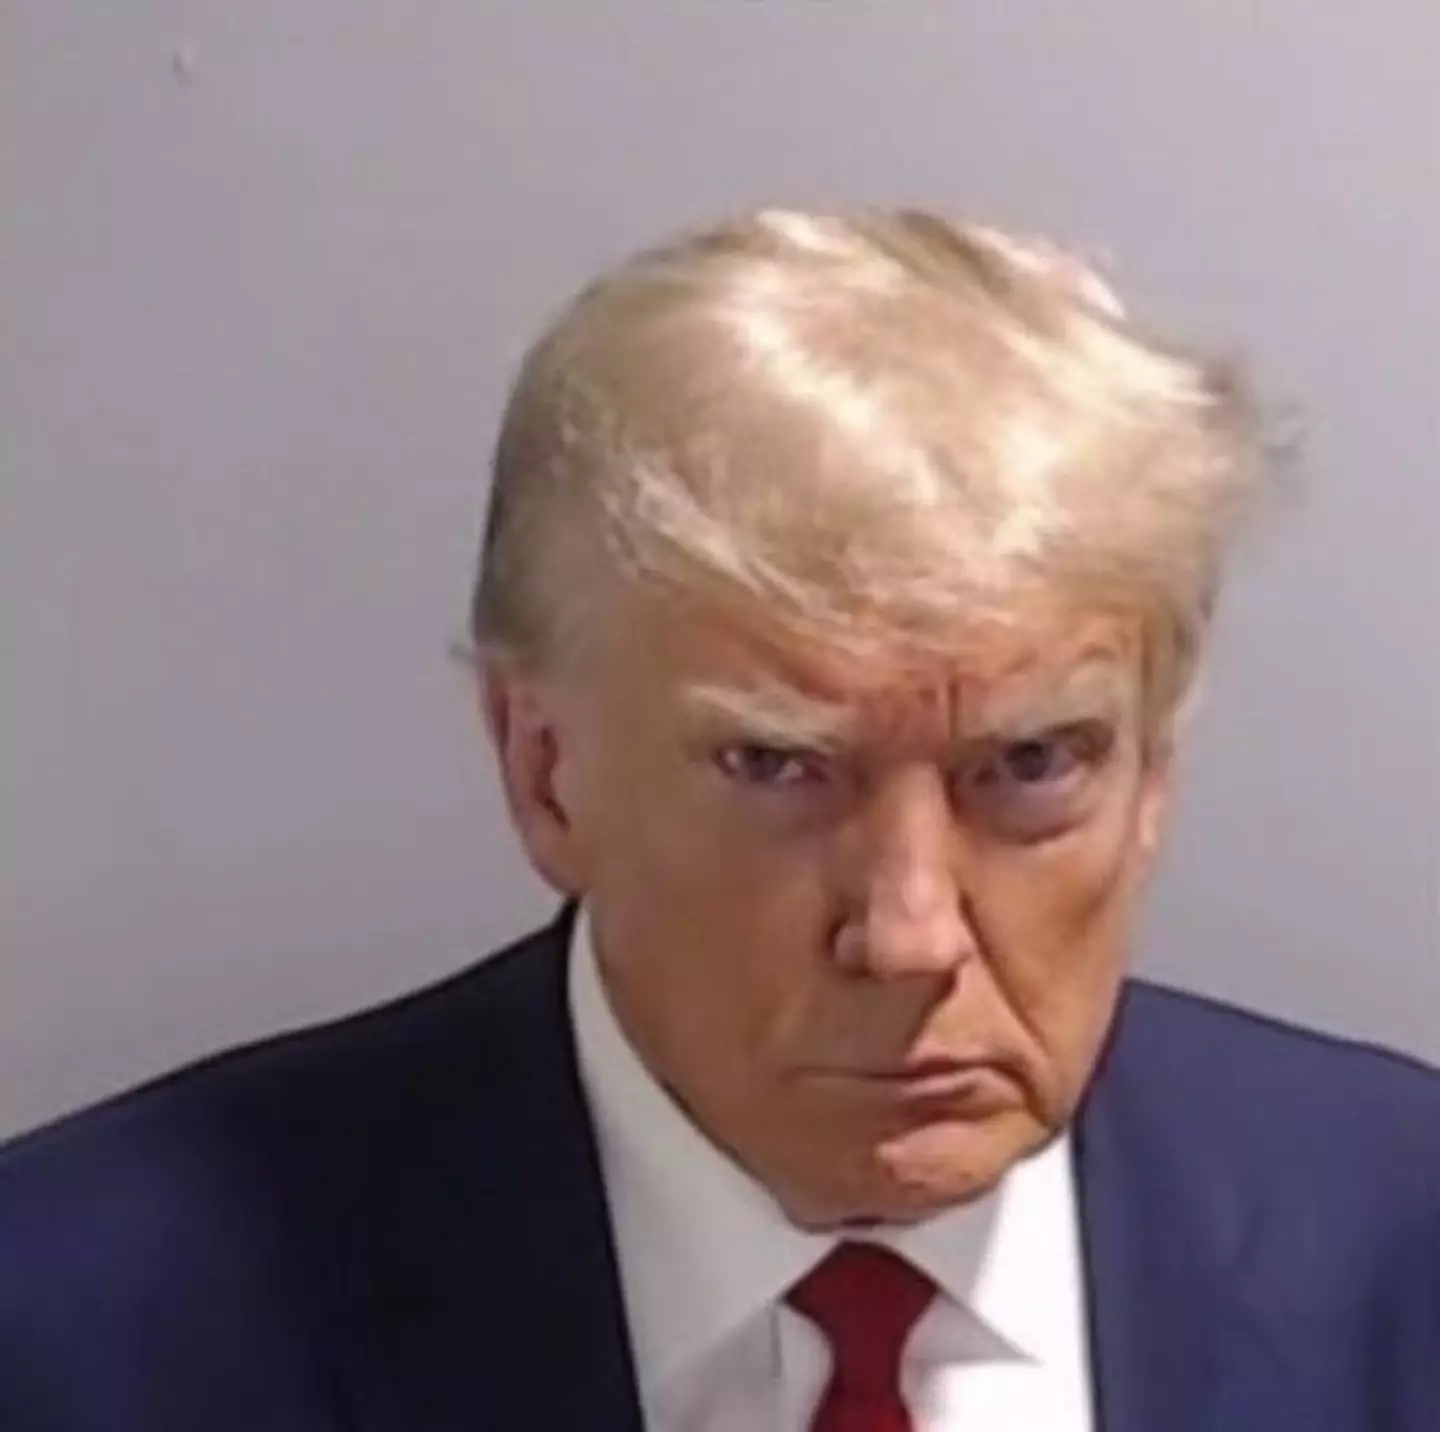 Donald Trump’s historic mugshot is now unofficially meme-of-the-year.